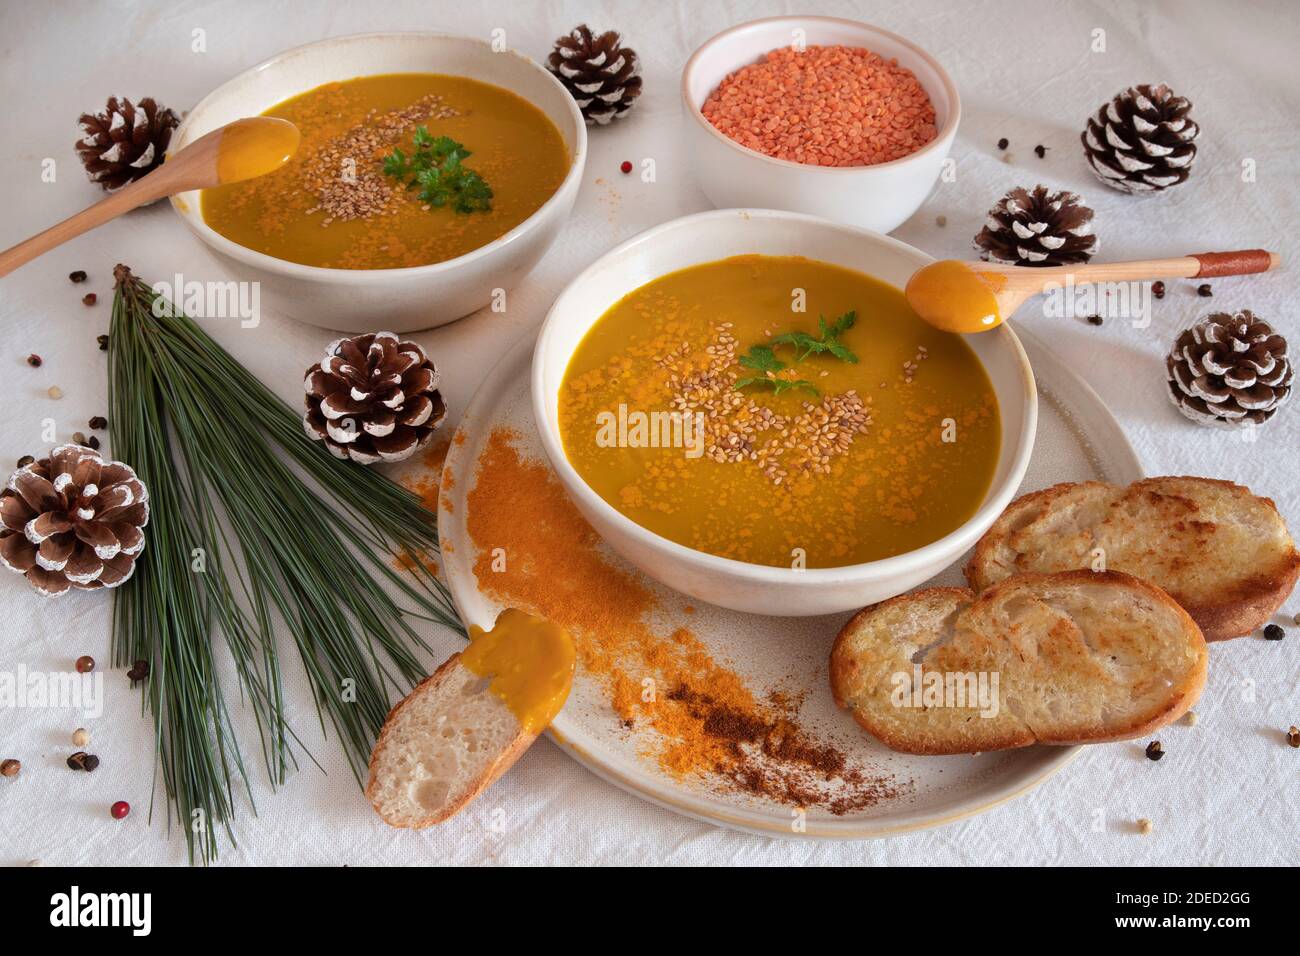 Orange soup in a bowl, pumpkin, carrot or coral lentils Stock Photo